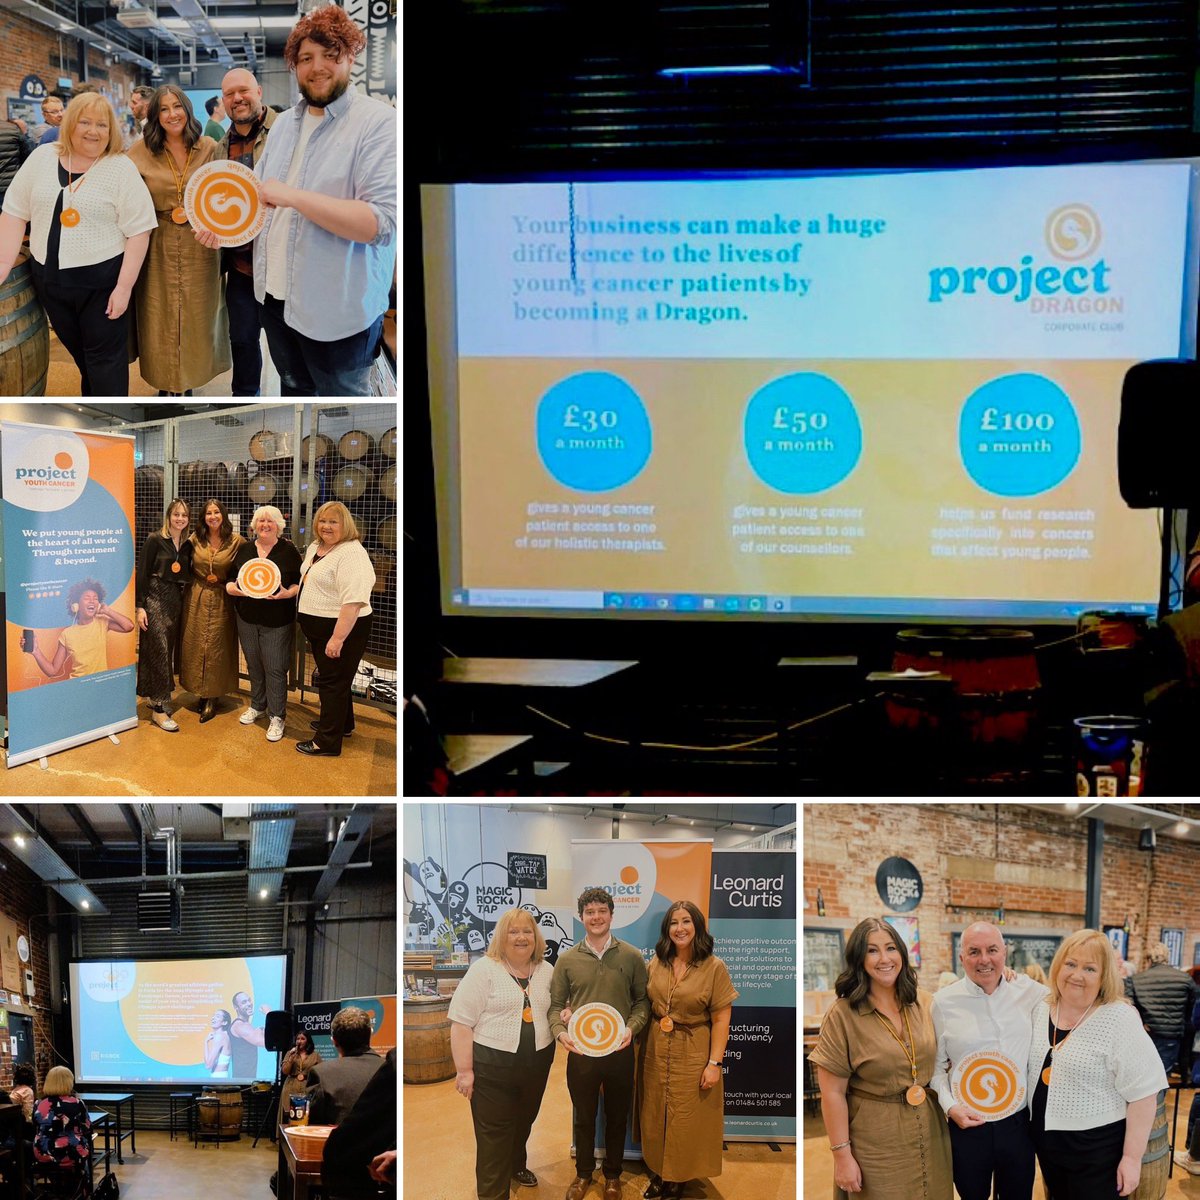 We were joined by corporate supporters, Trustees and Ambassadors yesterday, to launch the charity’s new corporate club, Project Dragon - symbolising wealth, progress and wisdom. The event was sponsored by Leonard Curtis and held at @MagicRockBrewCo #projectyouthcancer #csr